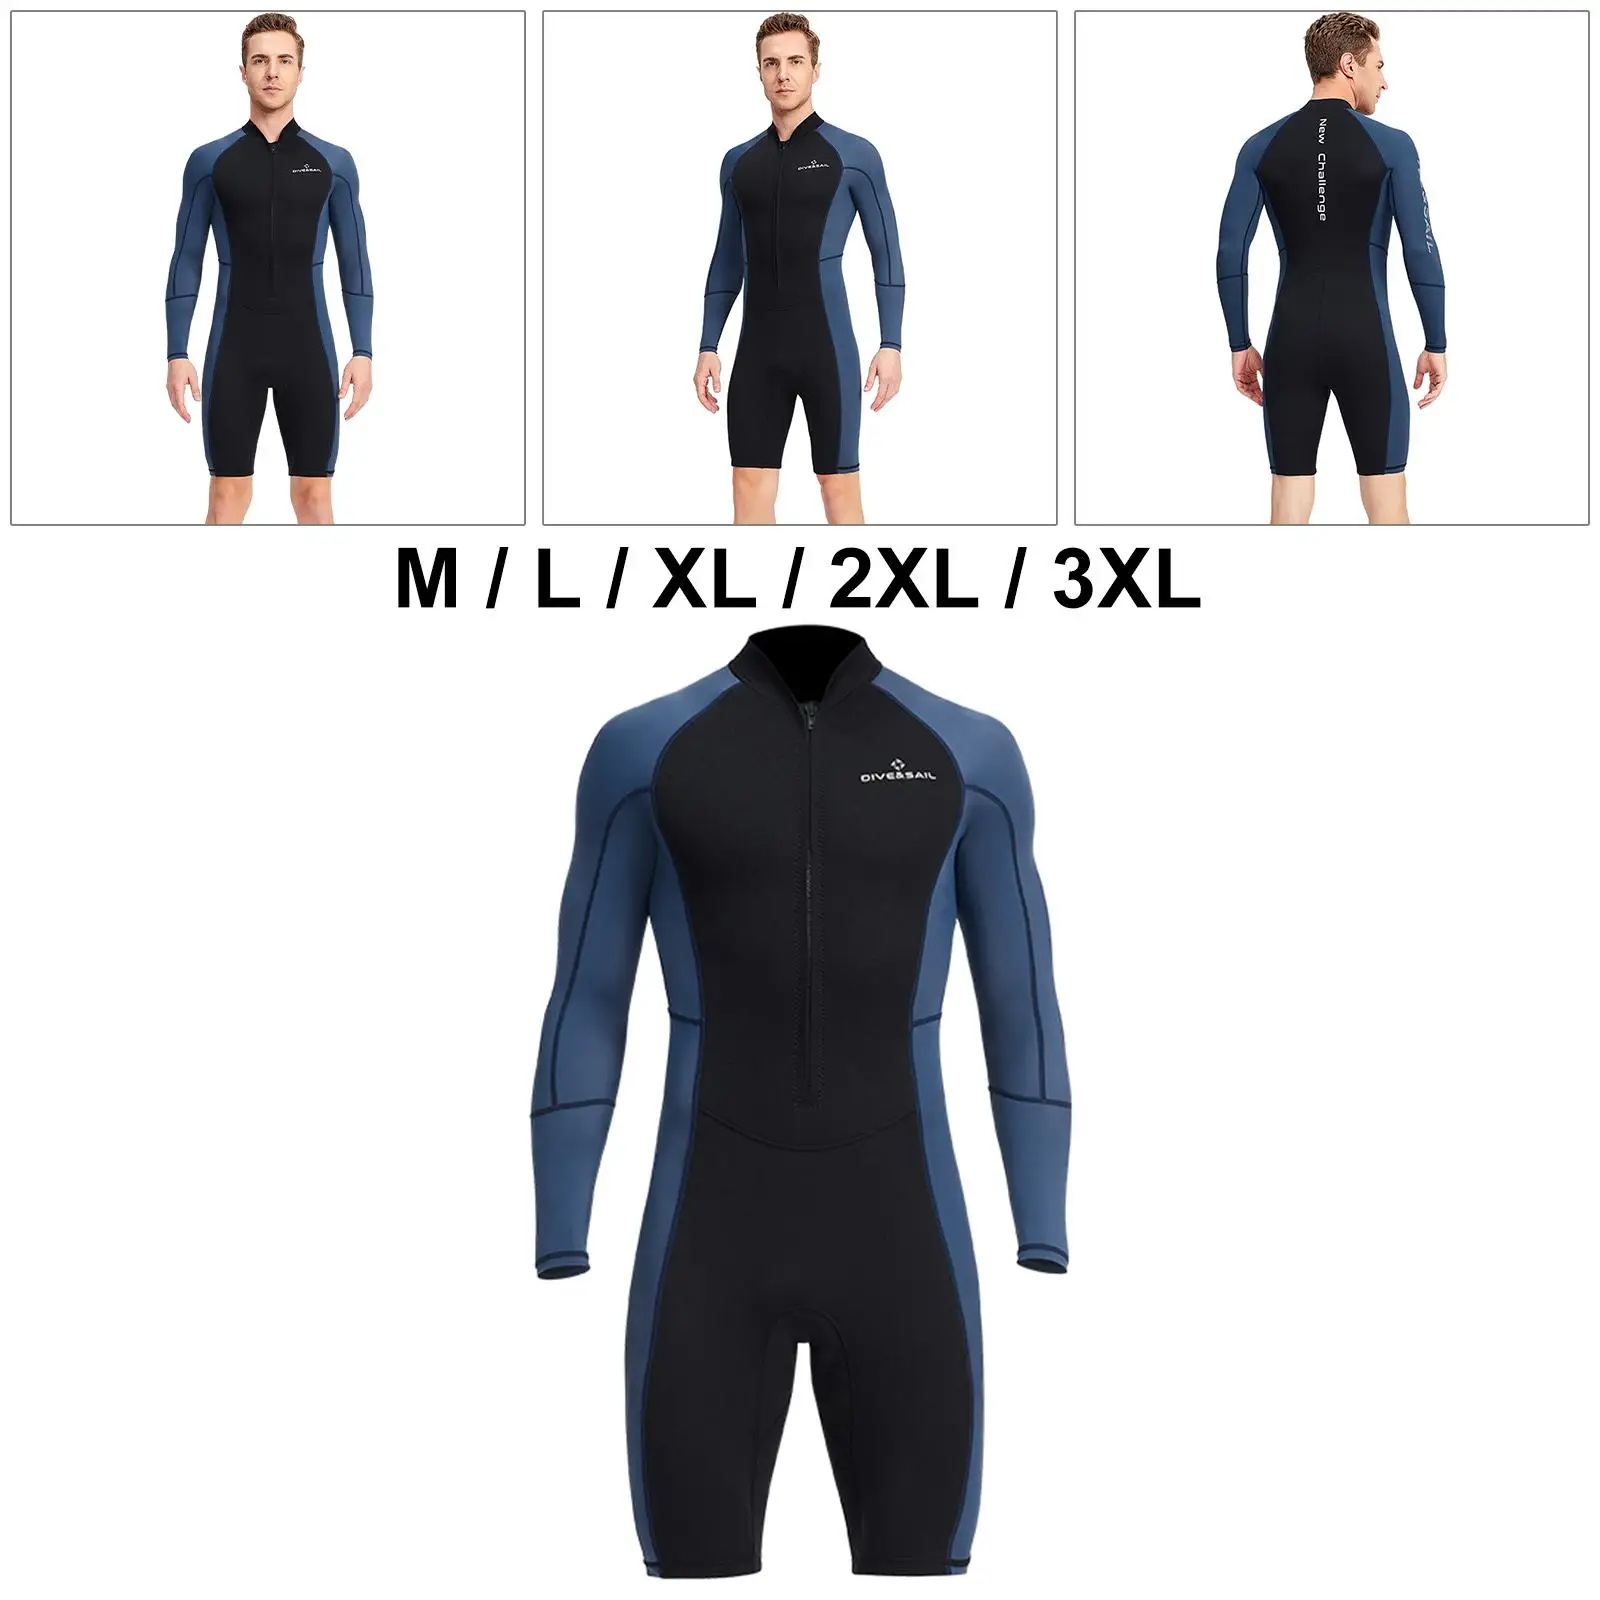 Swimsuit Wetsuit Scuba Diving Suit for Men Long Sleeve Swimwear One Piece UV Protection Wet Suit Surfing Snorkeling Kayaking